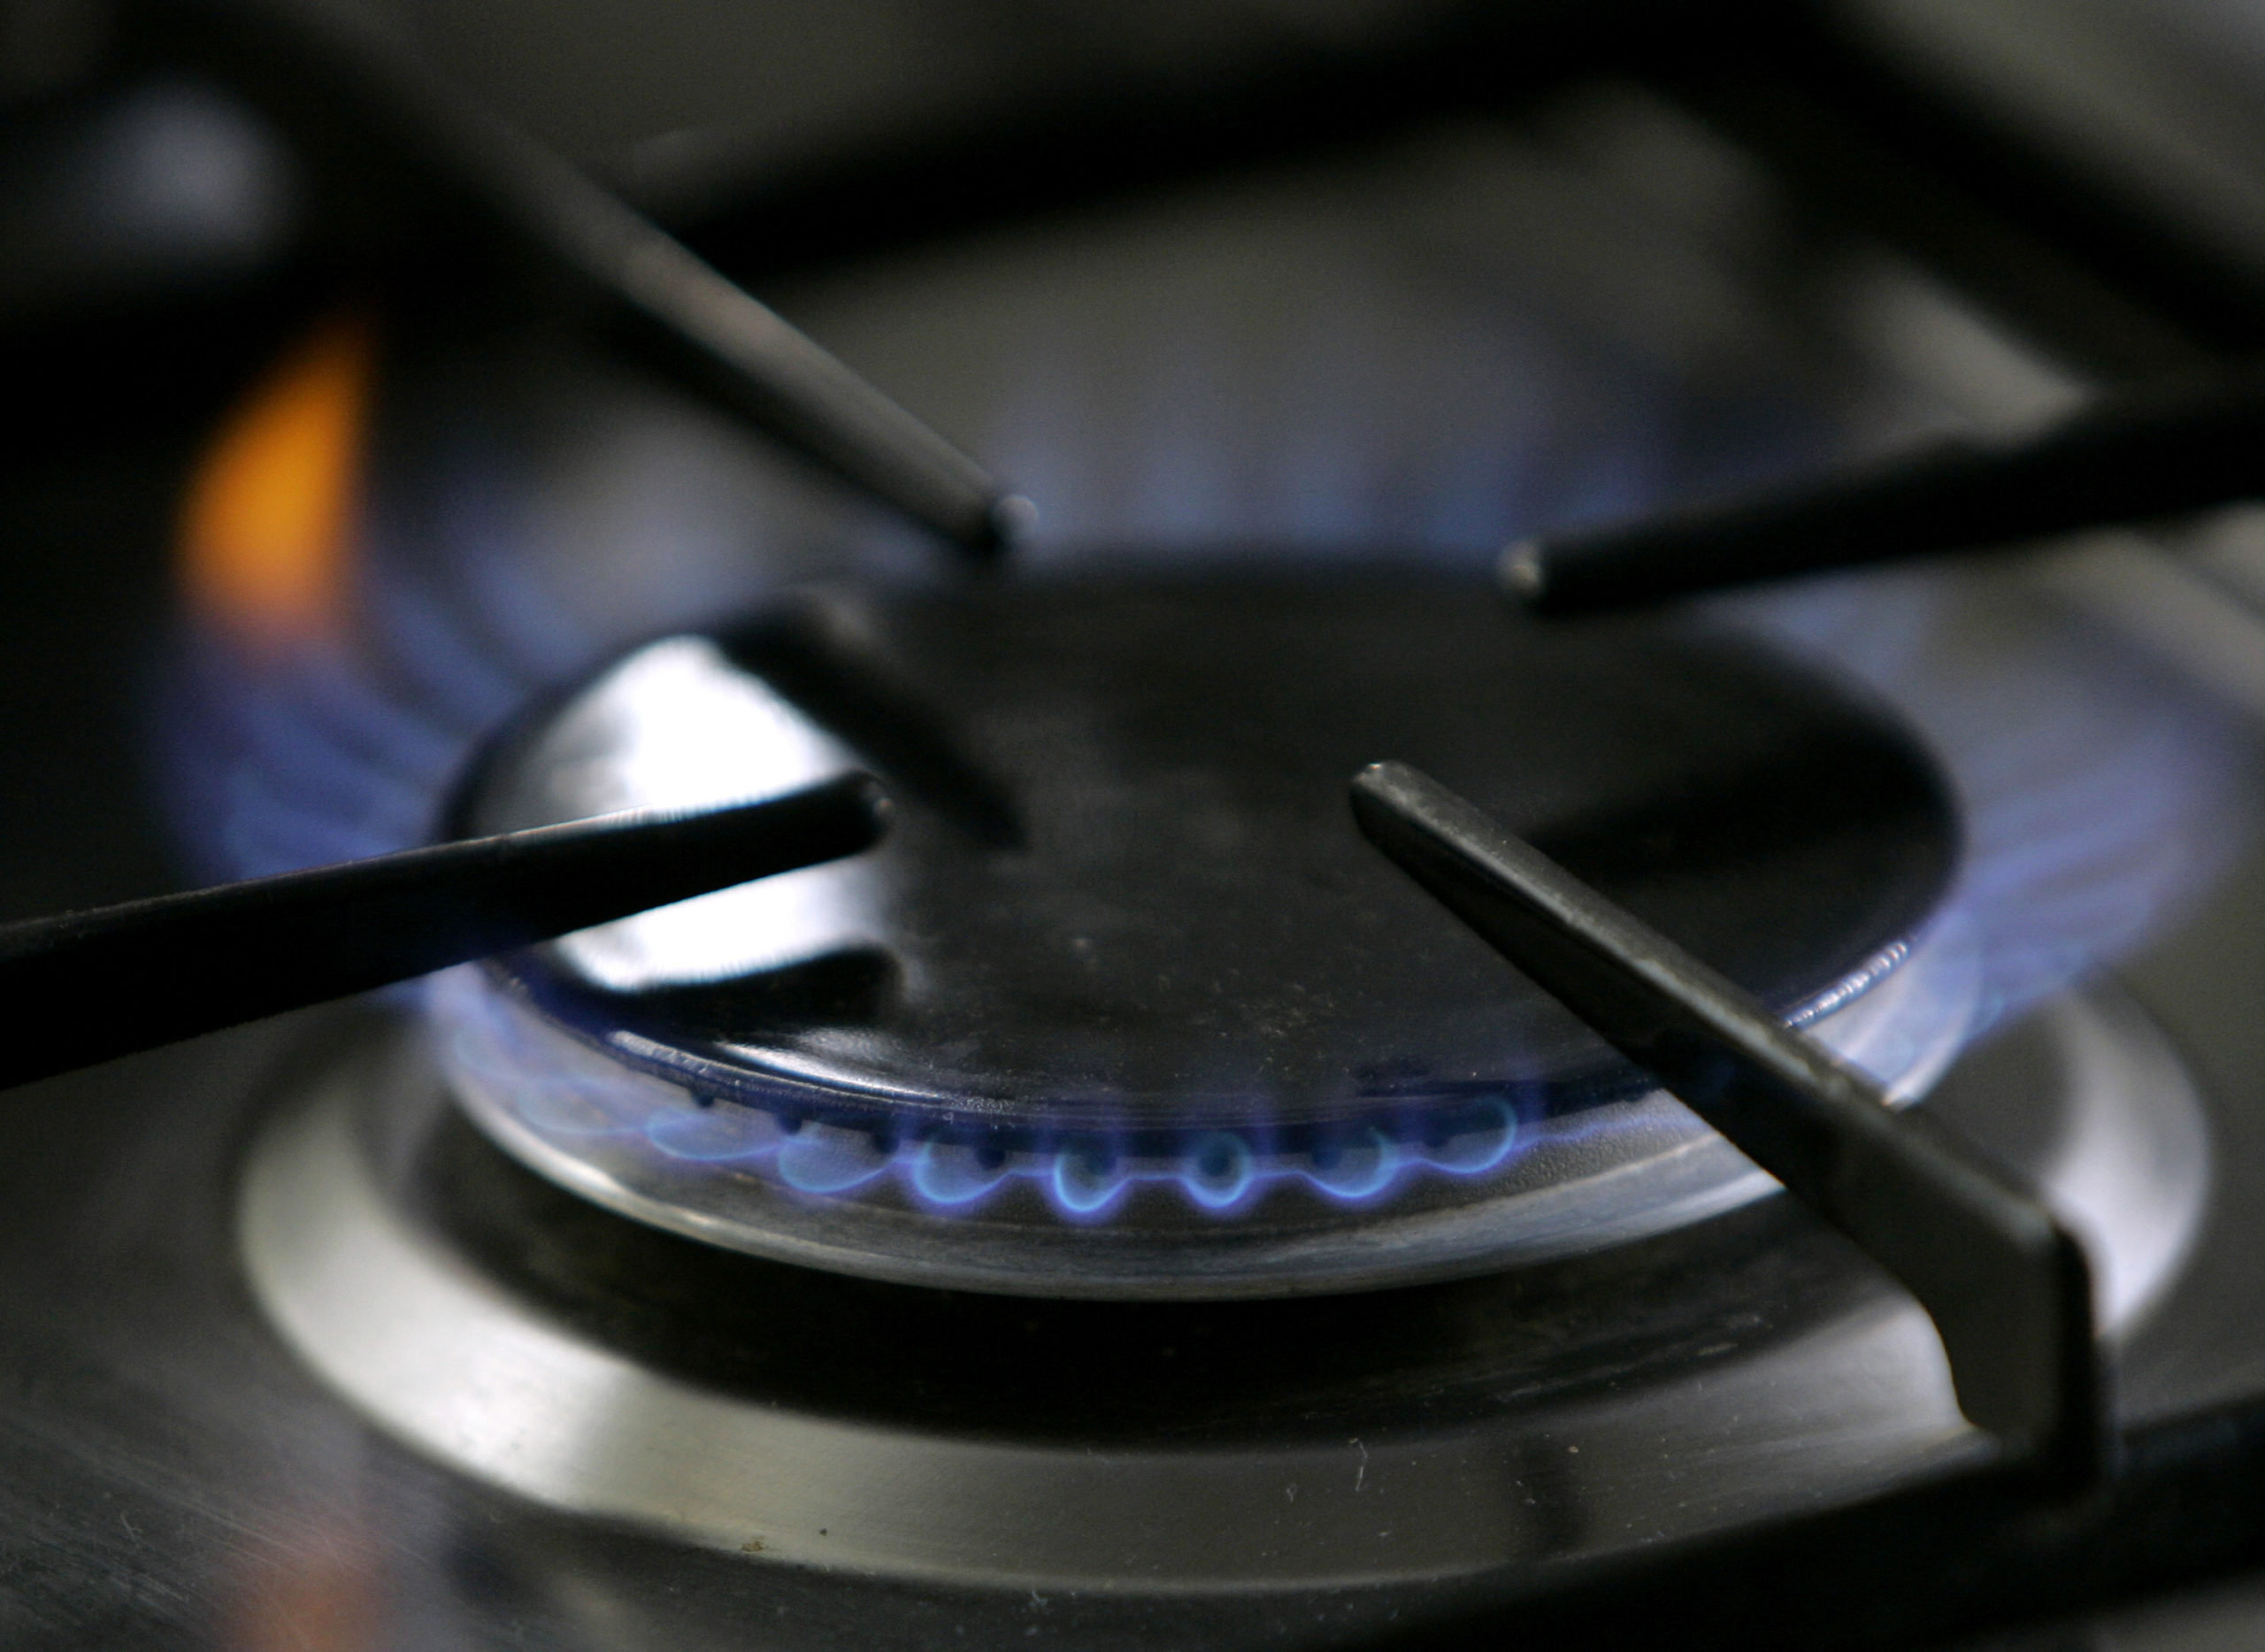 A gas-lit flame is ignited on a natural gas stove.